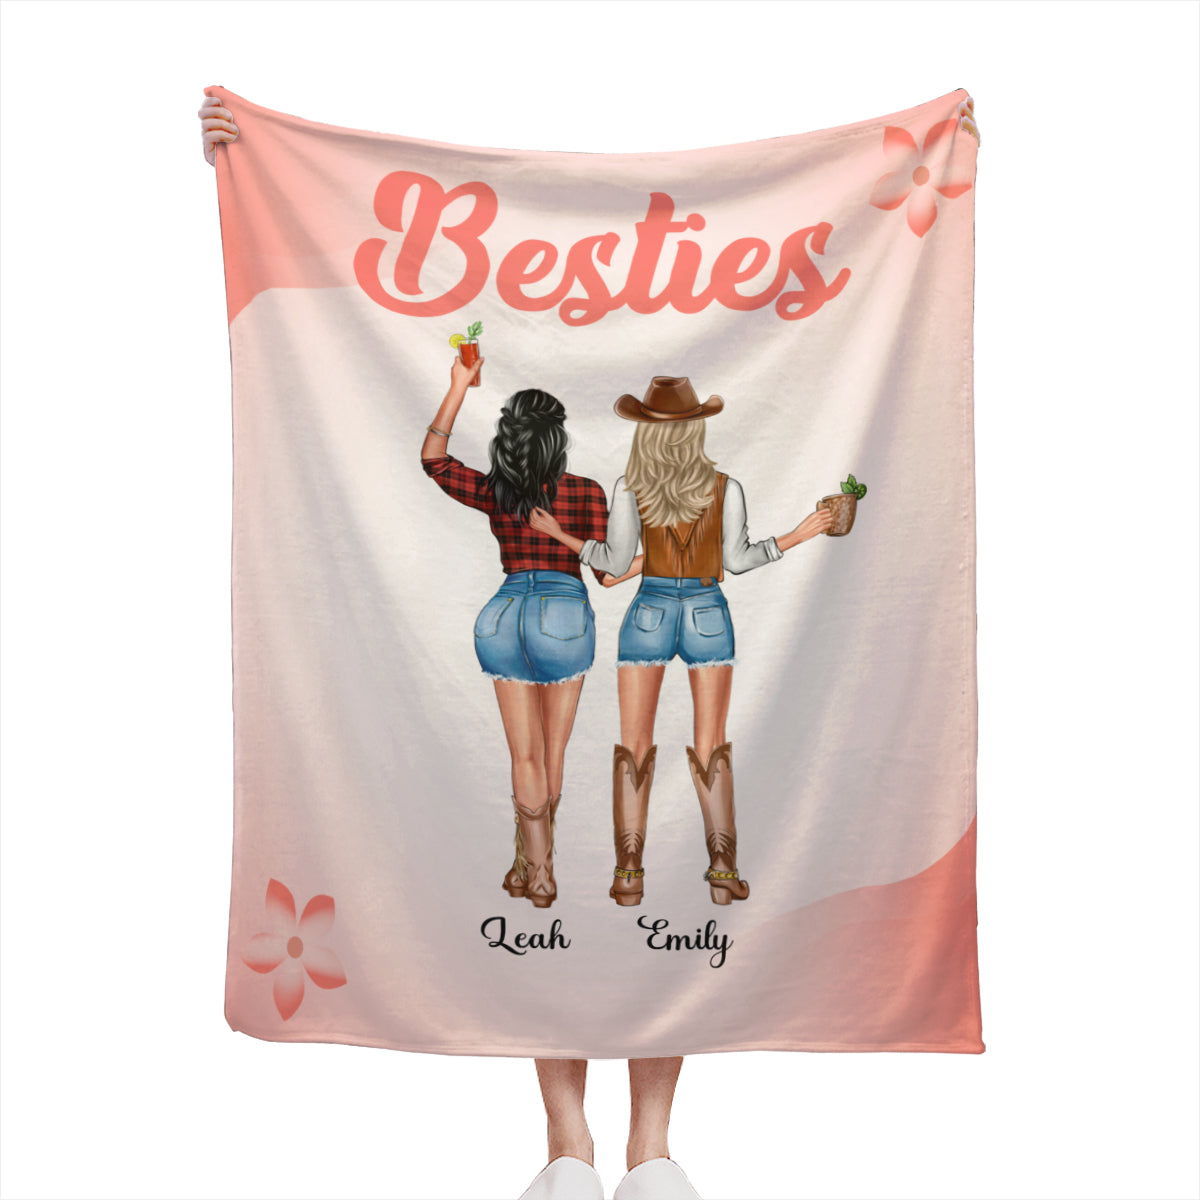 To My Besties-Blanket With Pictures for My Besties